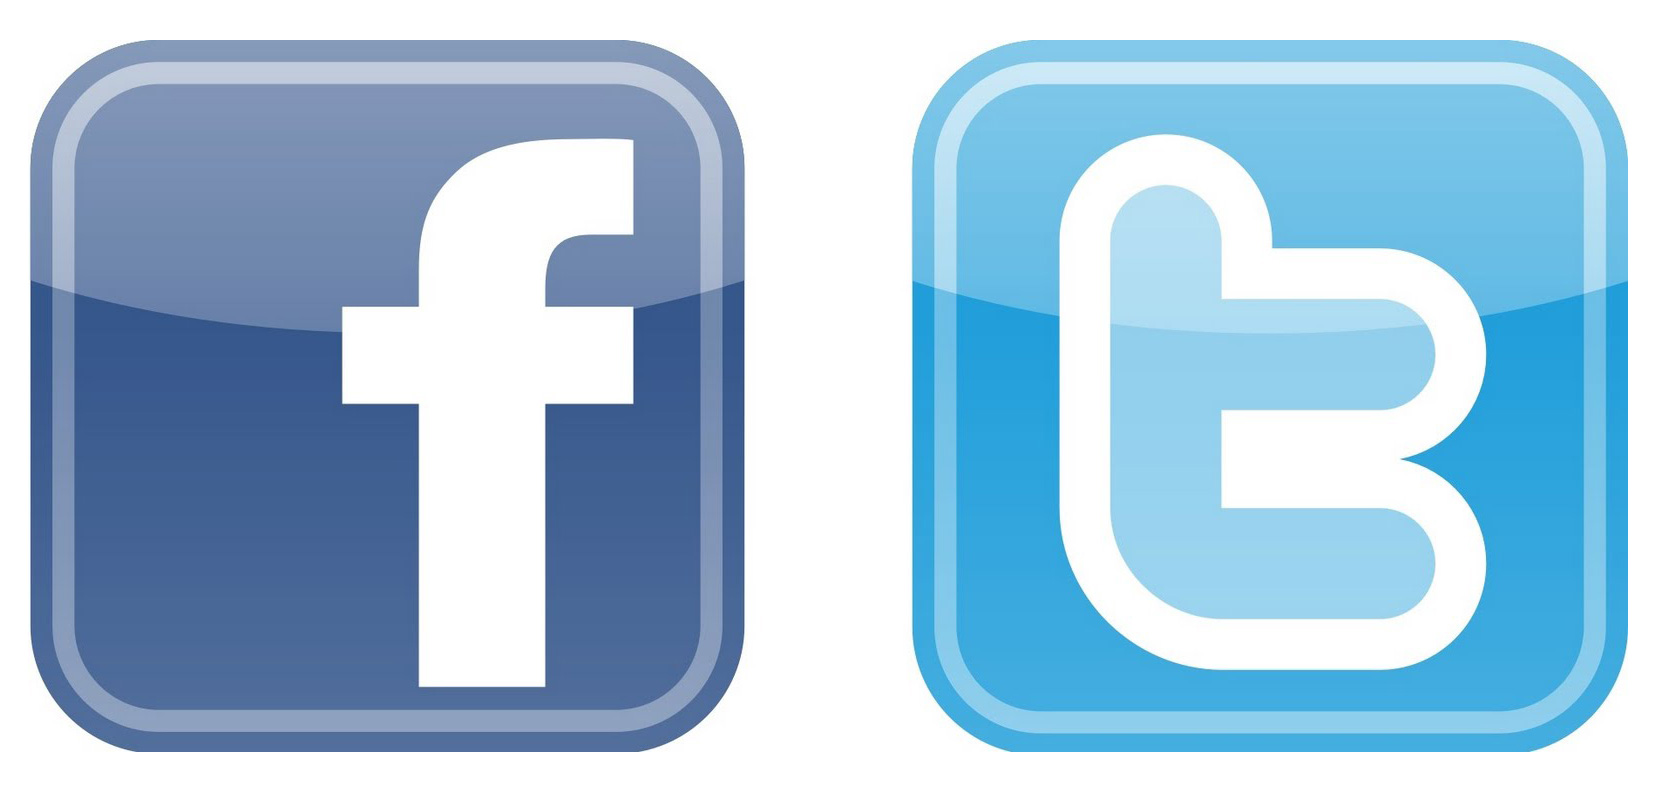 2 facebook icon packs - Vector icon packs - SVG, PSD, PNG, EPS 